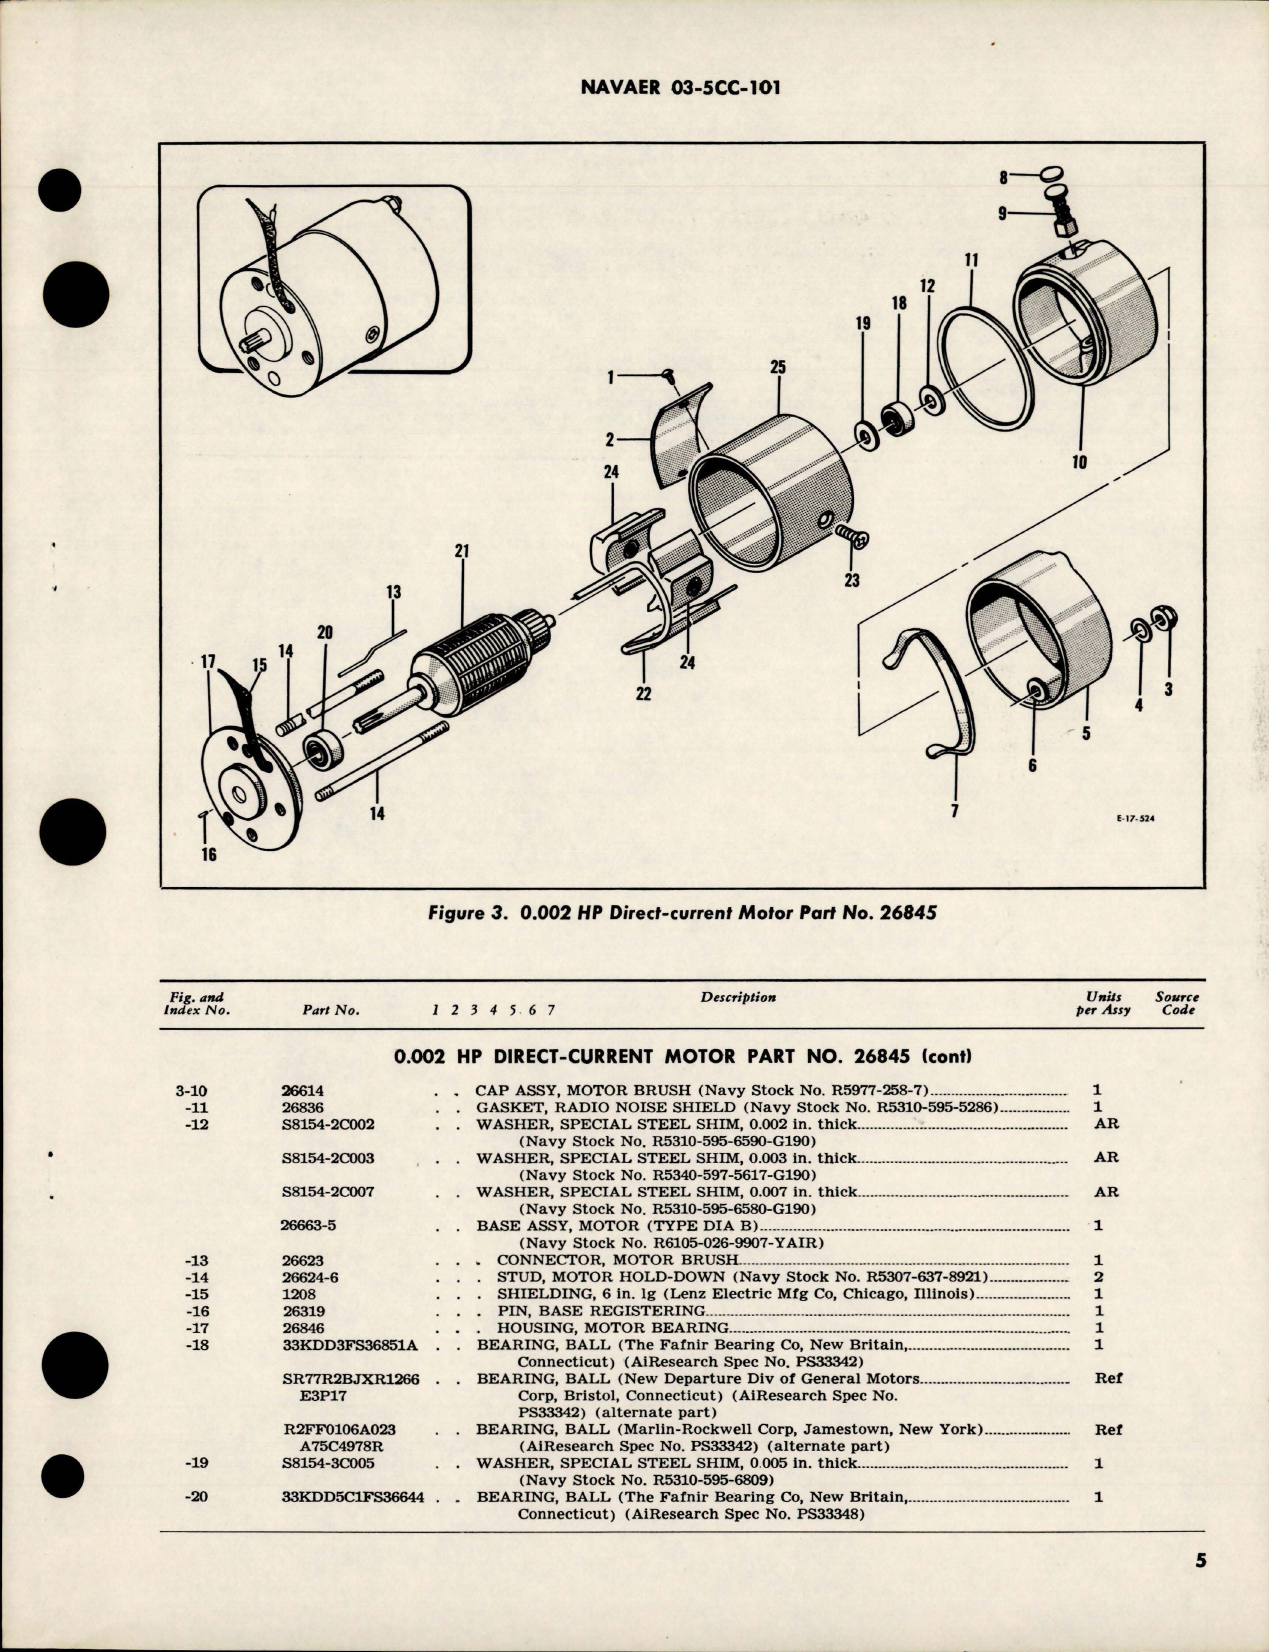 Sample page 5 from AirCorps Library document: Overhaul Instructions with Parts Breakdown for Direct Current Motor - 0.002 HP - Part 26845 